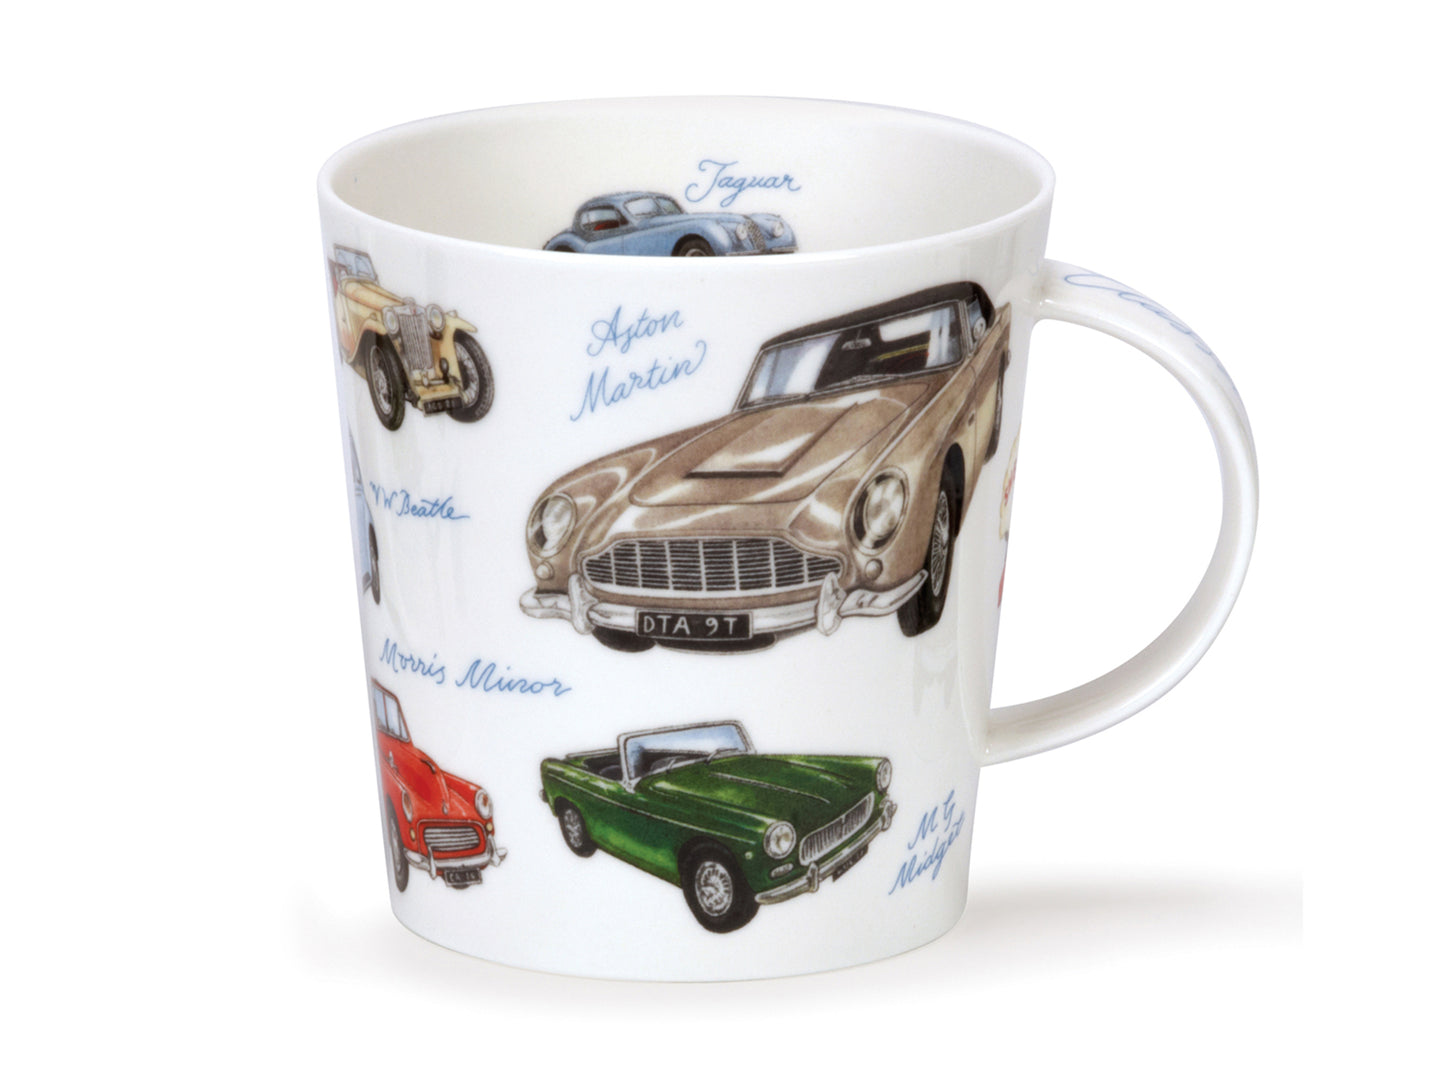 This Dunoon Cairngorm Classic Collection Cars mug is made from fine bone china and depicts all manner of retro cars around its exterior, designed by artist Richard Pratis. Each car is labelled with its brand, and there are two smaller cars printed in the inner rim of the mug.